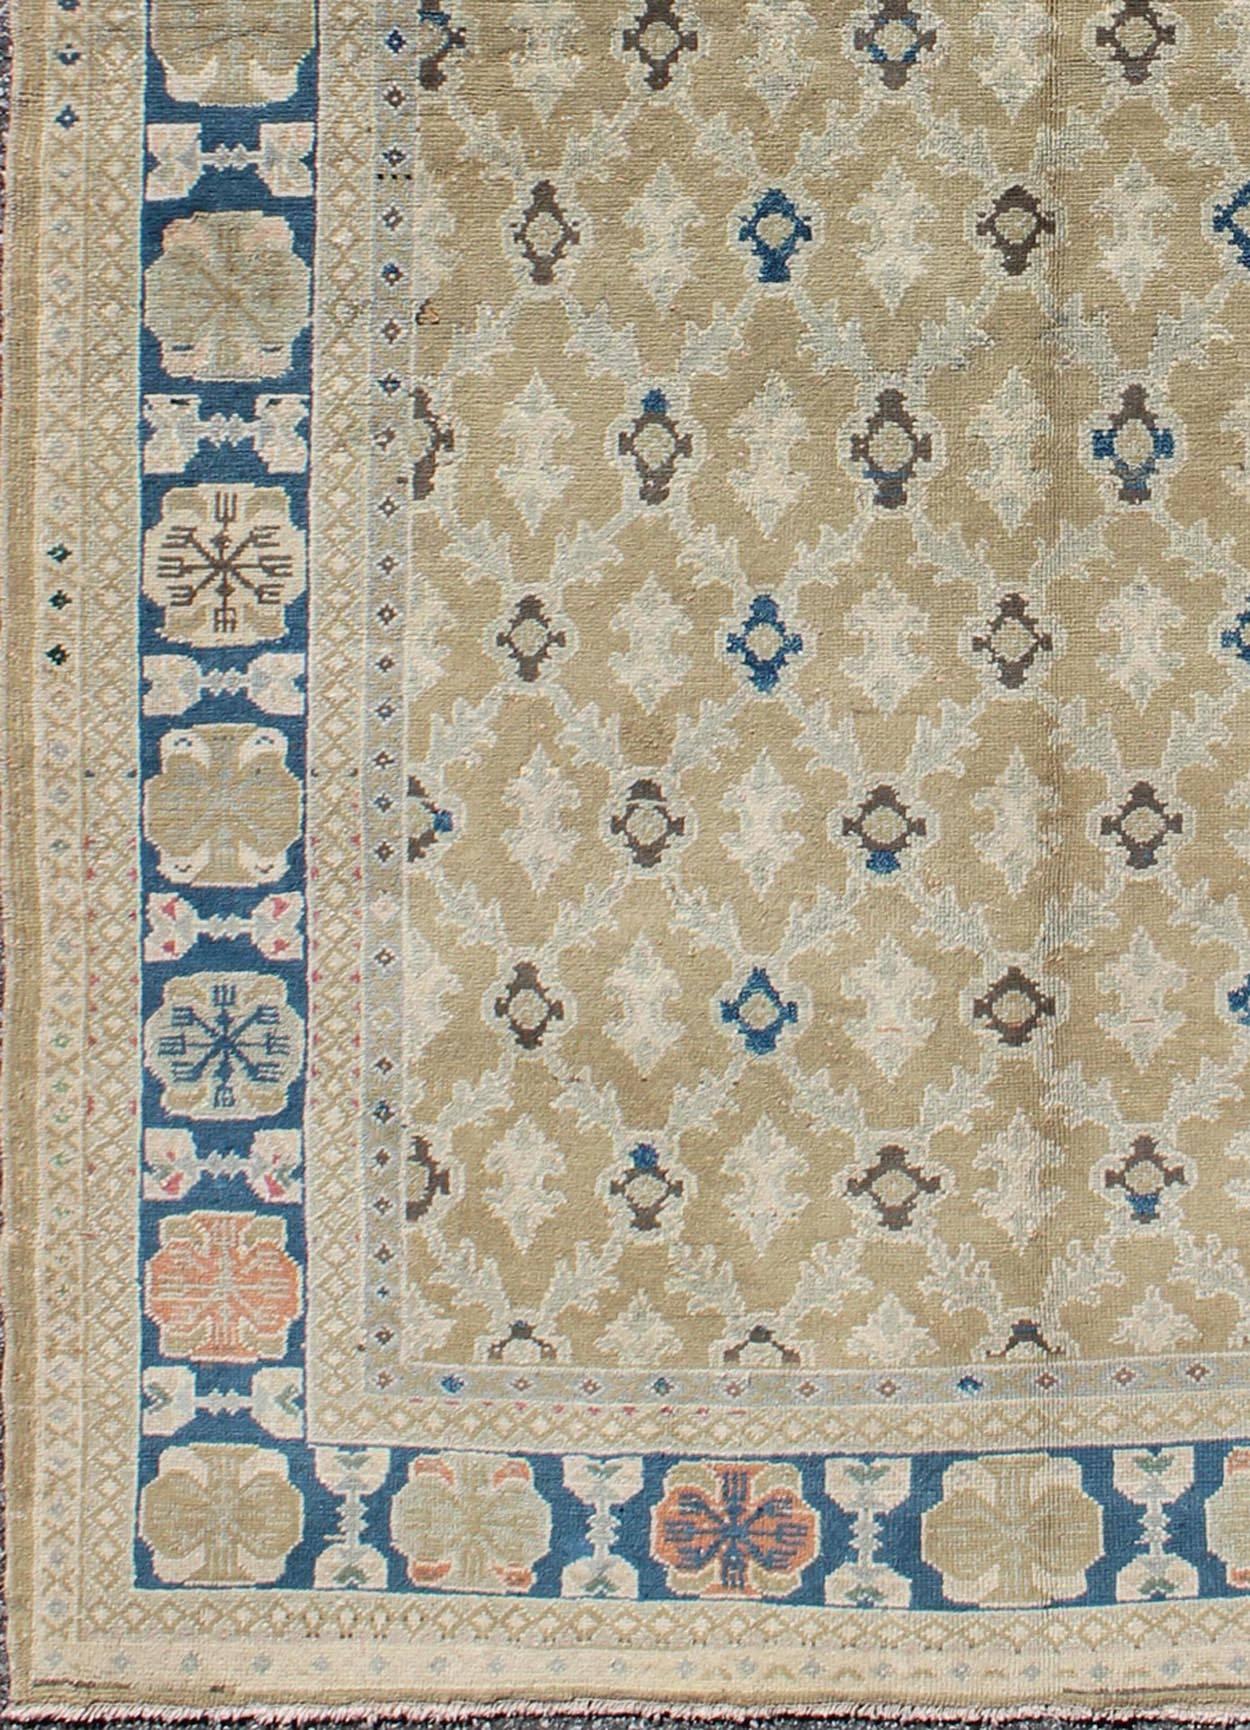 Fine Turkish Sivas Rug in All Over Geometric Design in Tan, Taupe, Blue & Brown.
This unique vintage Sivas is an extraordinary work of art and is distinguished by profoundly perceptive palettes of blue, straw and Princeton gold for a beautiful